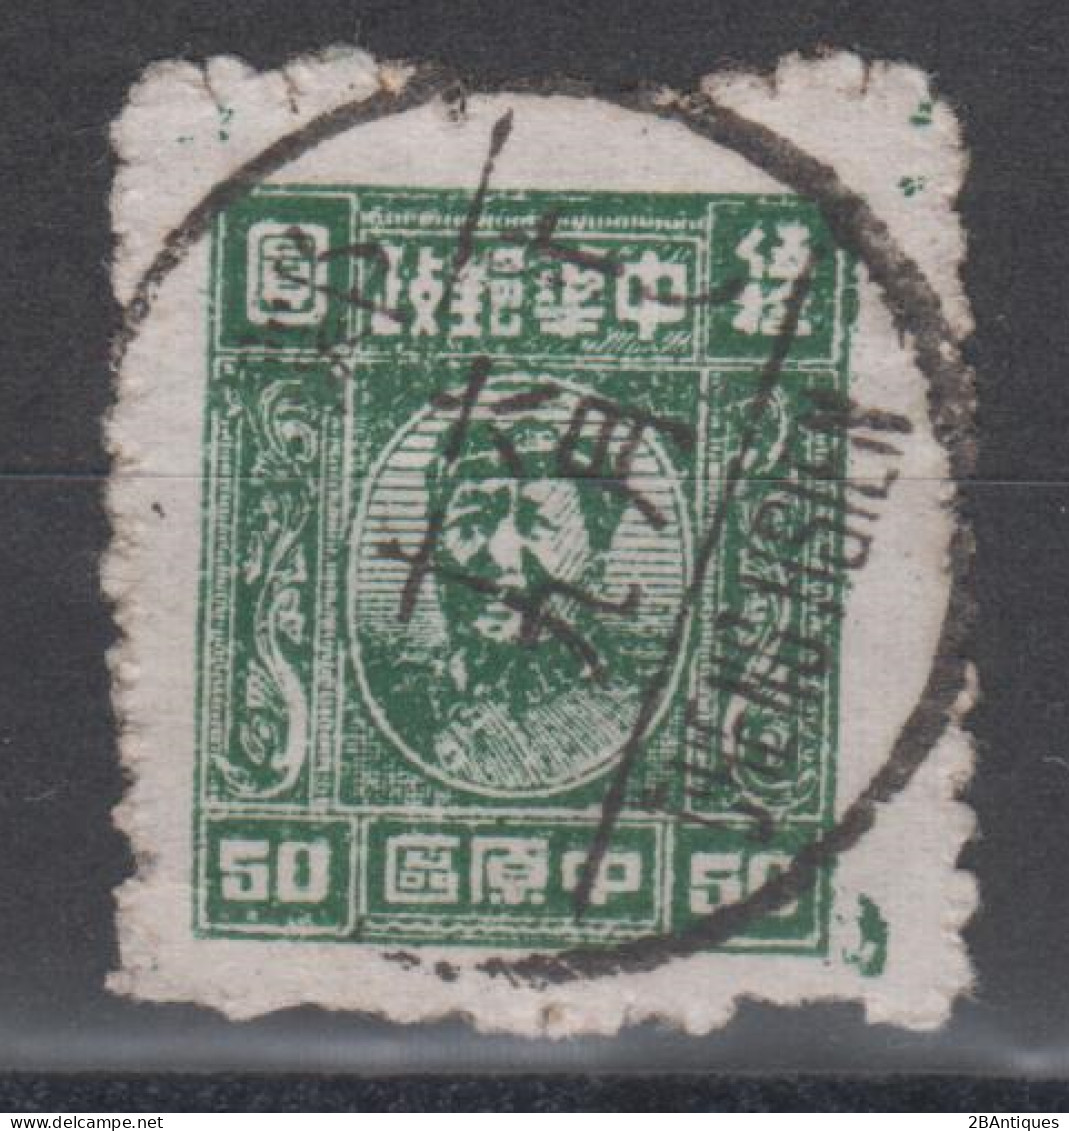 CENTRAL CHINA 1949 - Mao With Very Fine Cancellation - China Central 1948-49